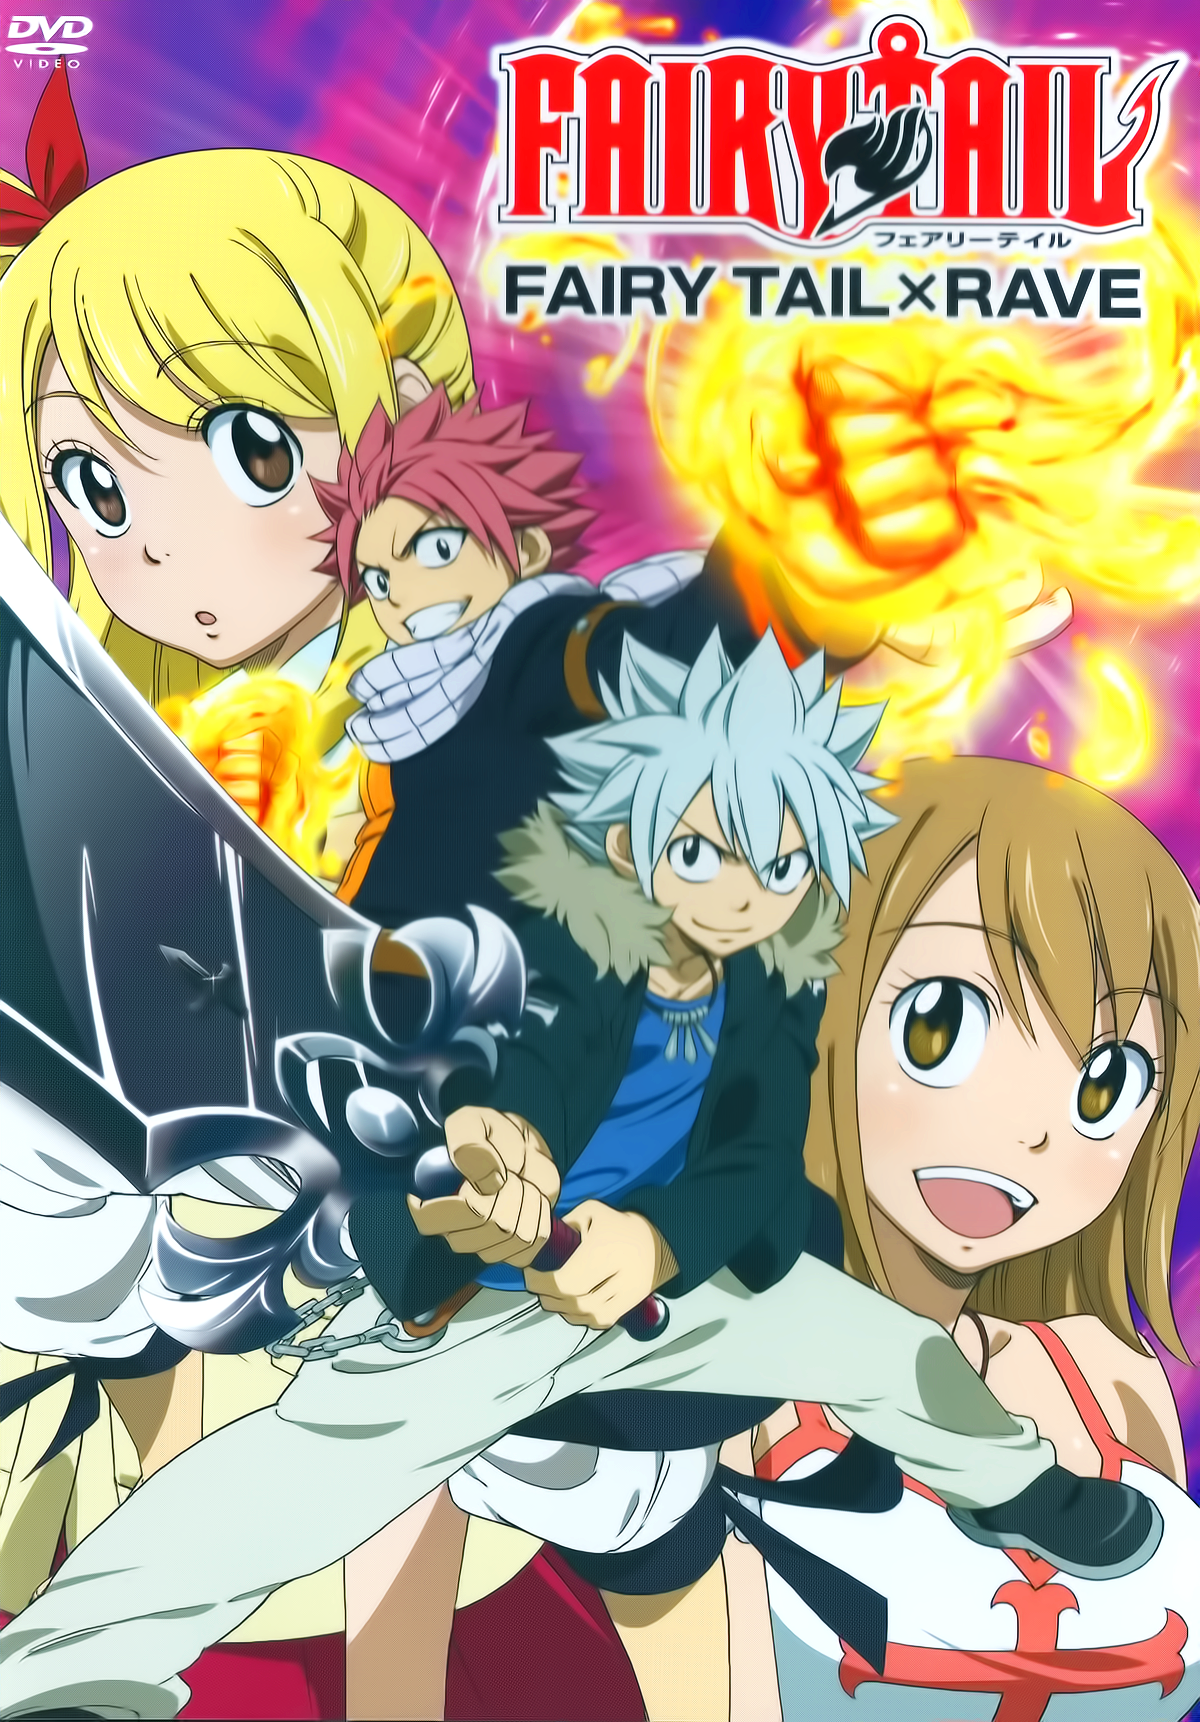 Fairy Tail Season 9  Cour 4 sub Episode 45 Eng Sub  Watch legally on  WakanimTV